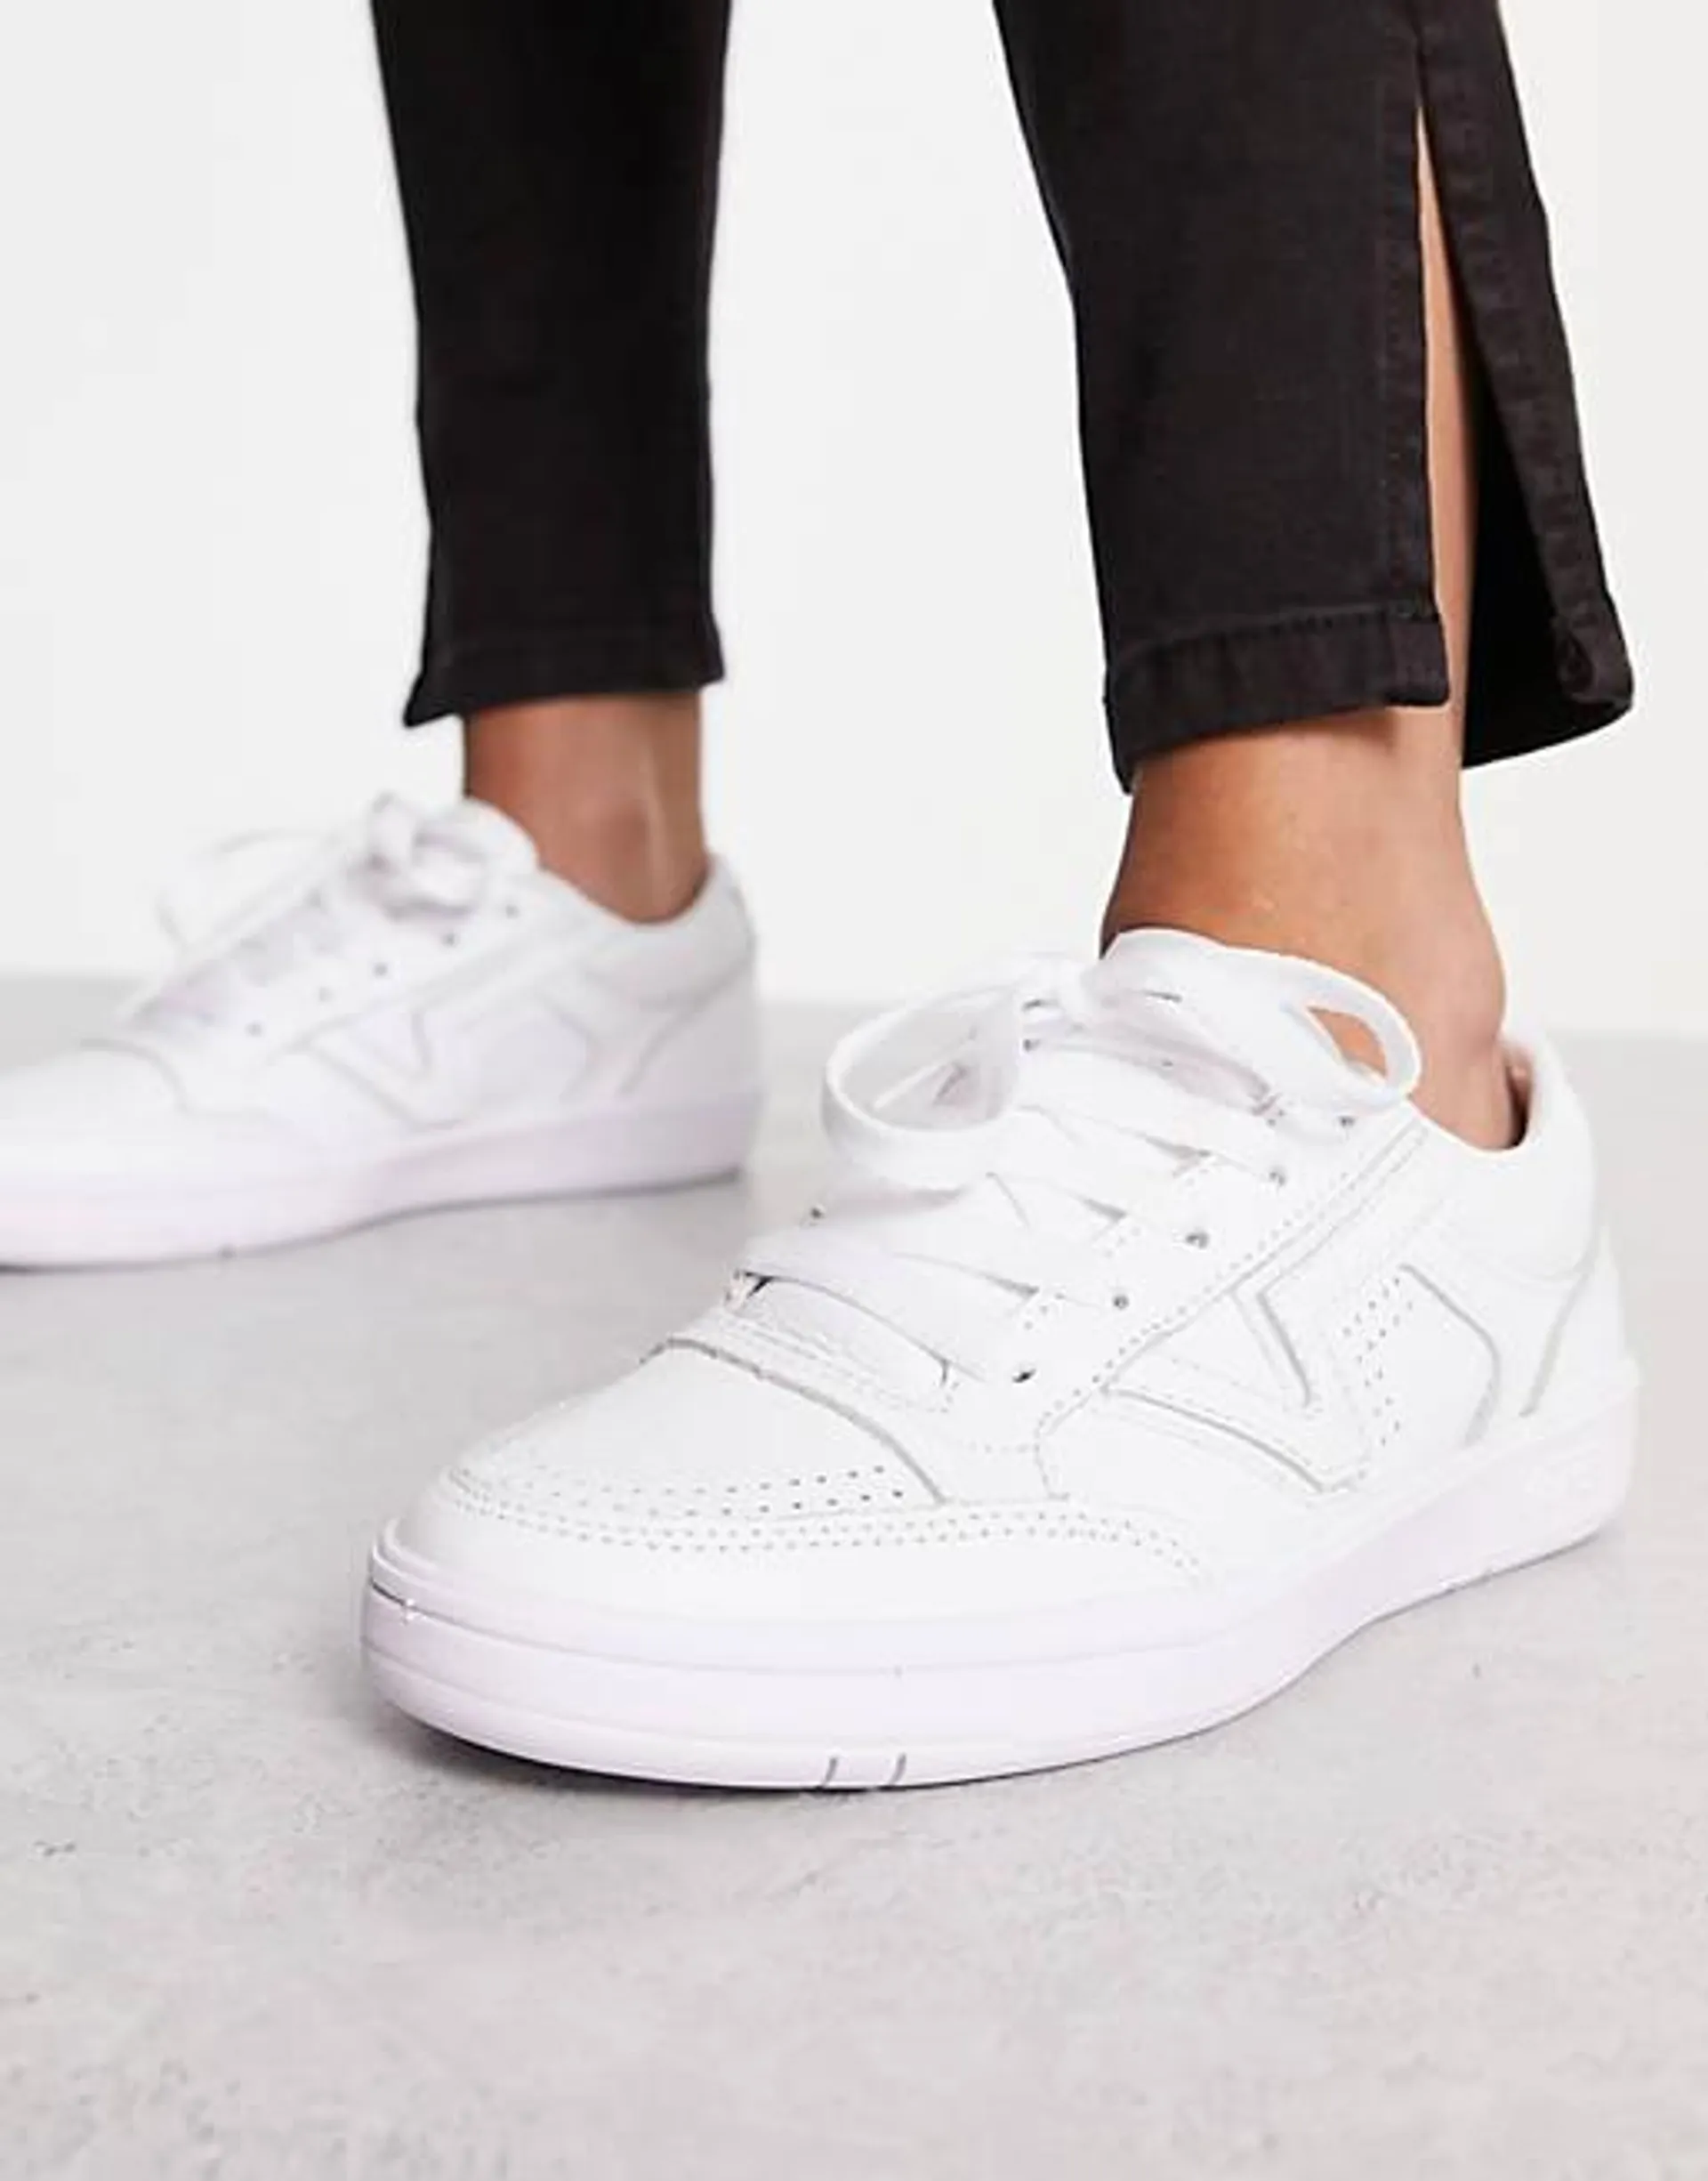 Vans Lowland trainers in triple white leather